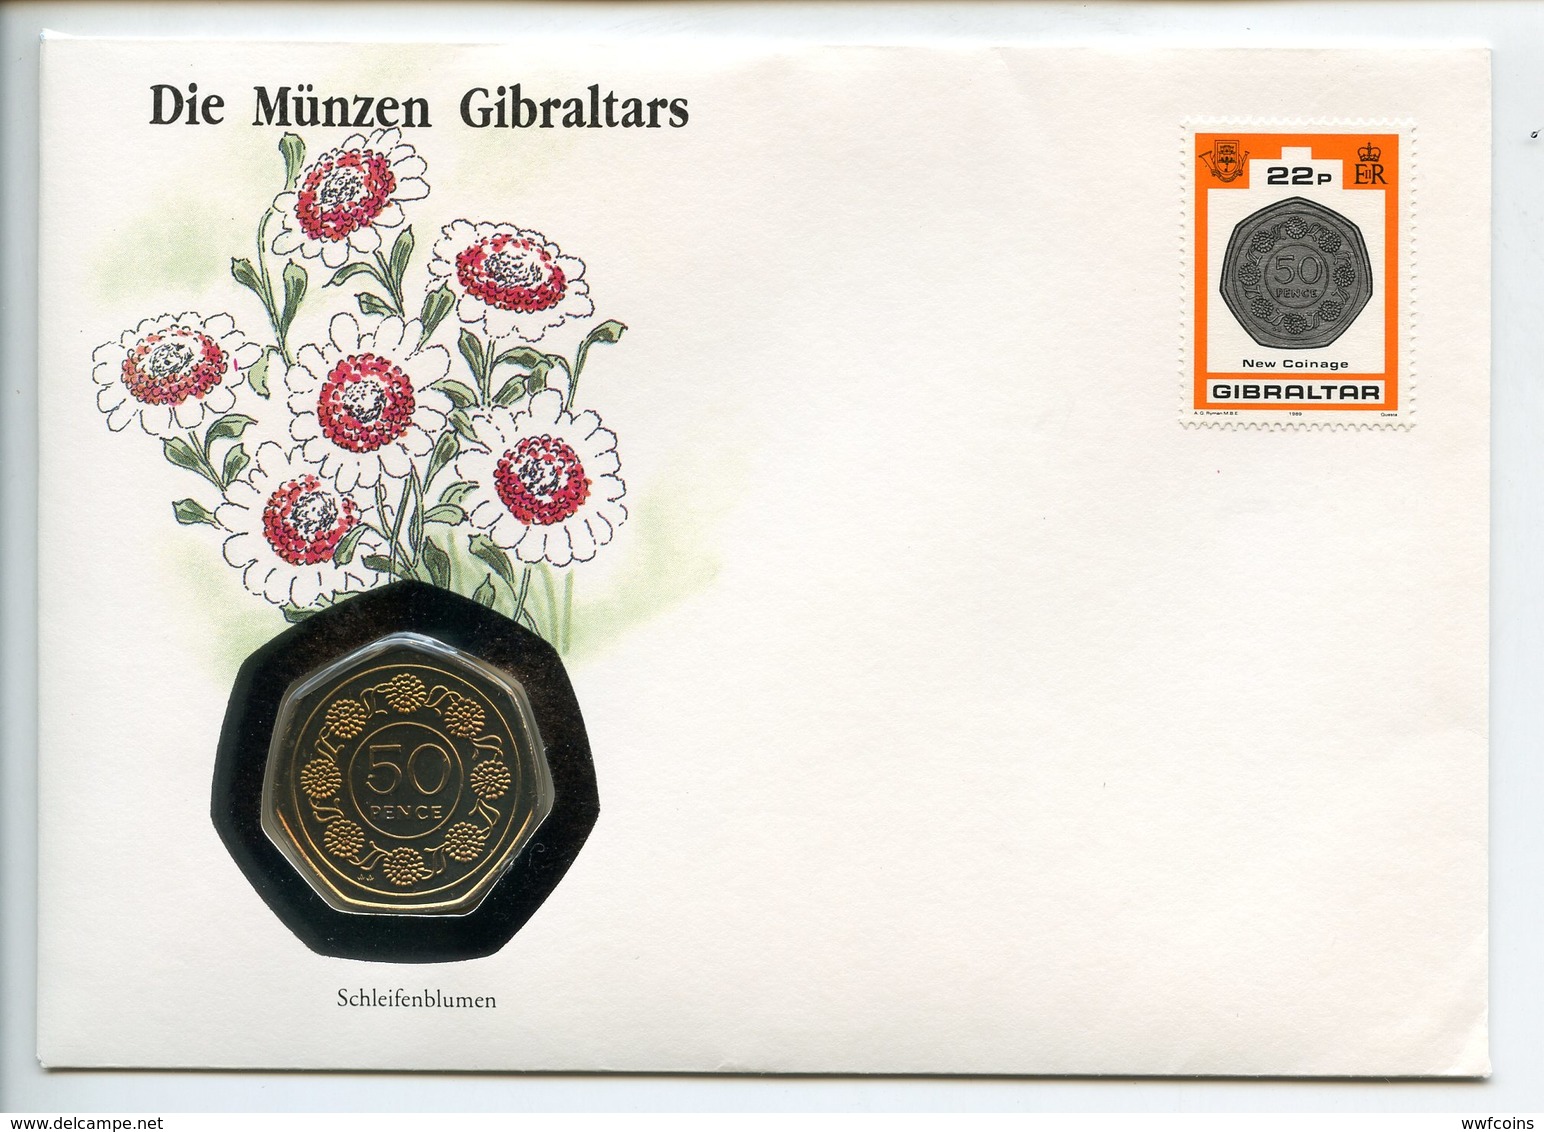 POSTCARD STAMP BUSTA FRANCOBOLLO GIBRALTAR 50 PENCE 1989 LOOP FLOWERS FAUNA NEW COINAGE FIRST DAY OF ISSUE FDC UNC (1) - Gibilterra